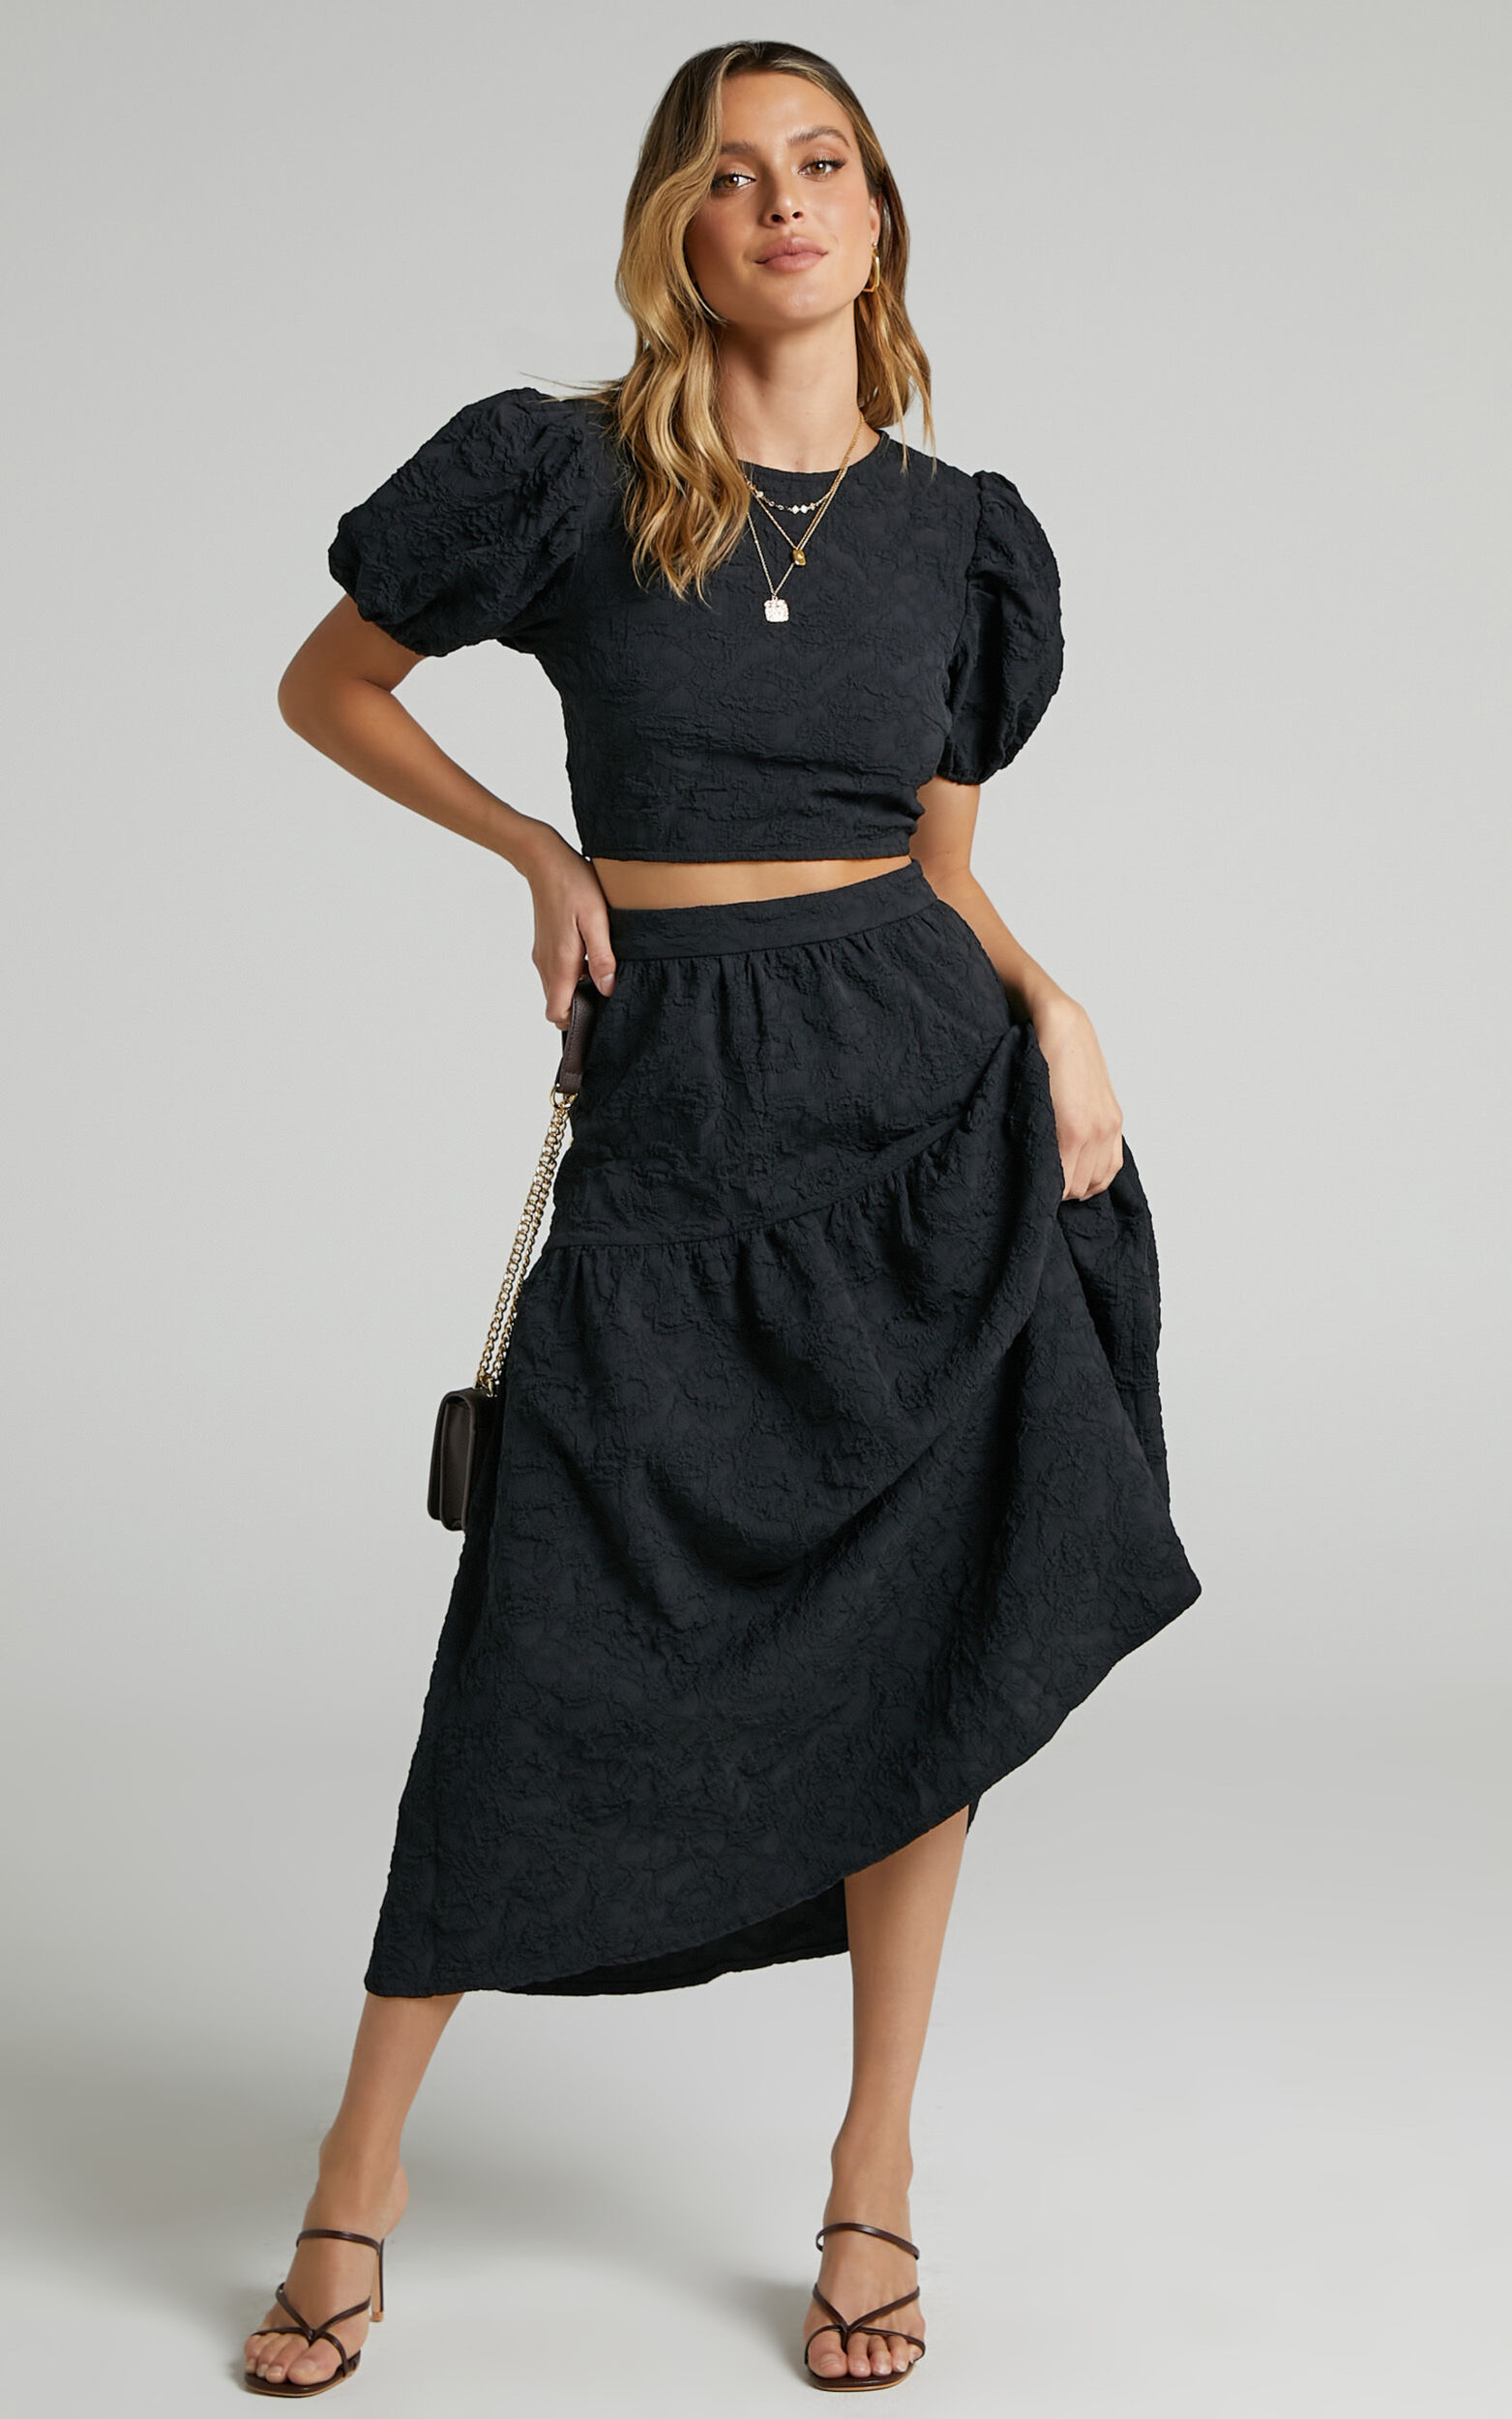 Leila Two Piece Set - Puff Sleeve Top and Midi Skirt Set in Black - 06, BLK1